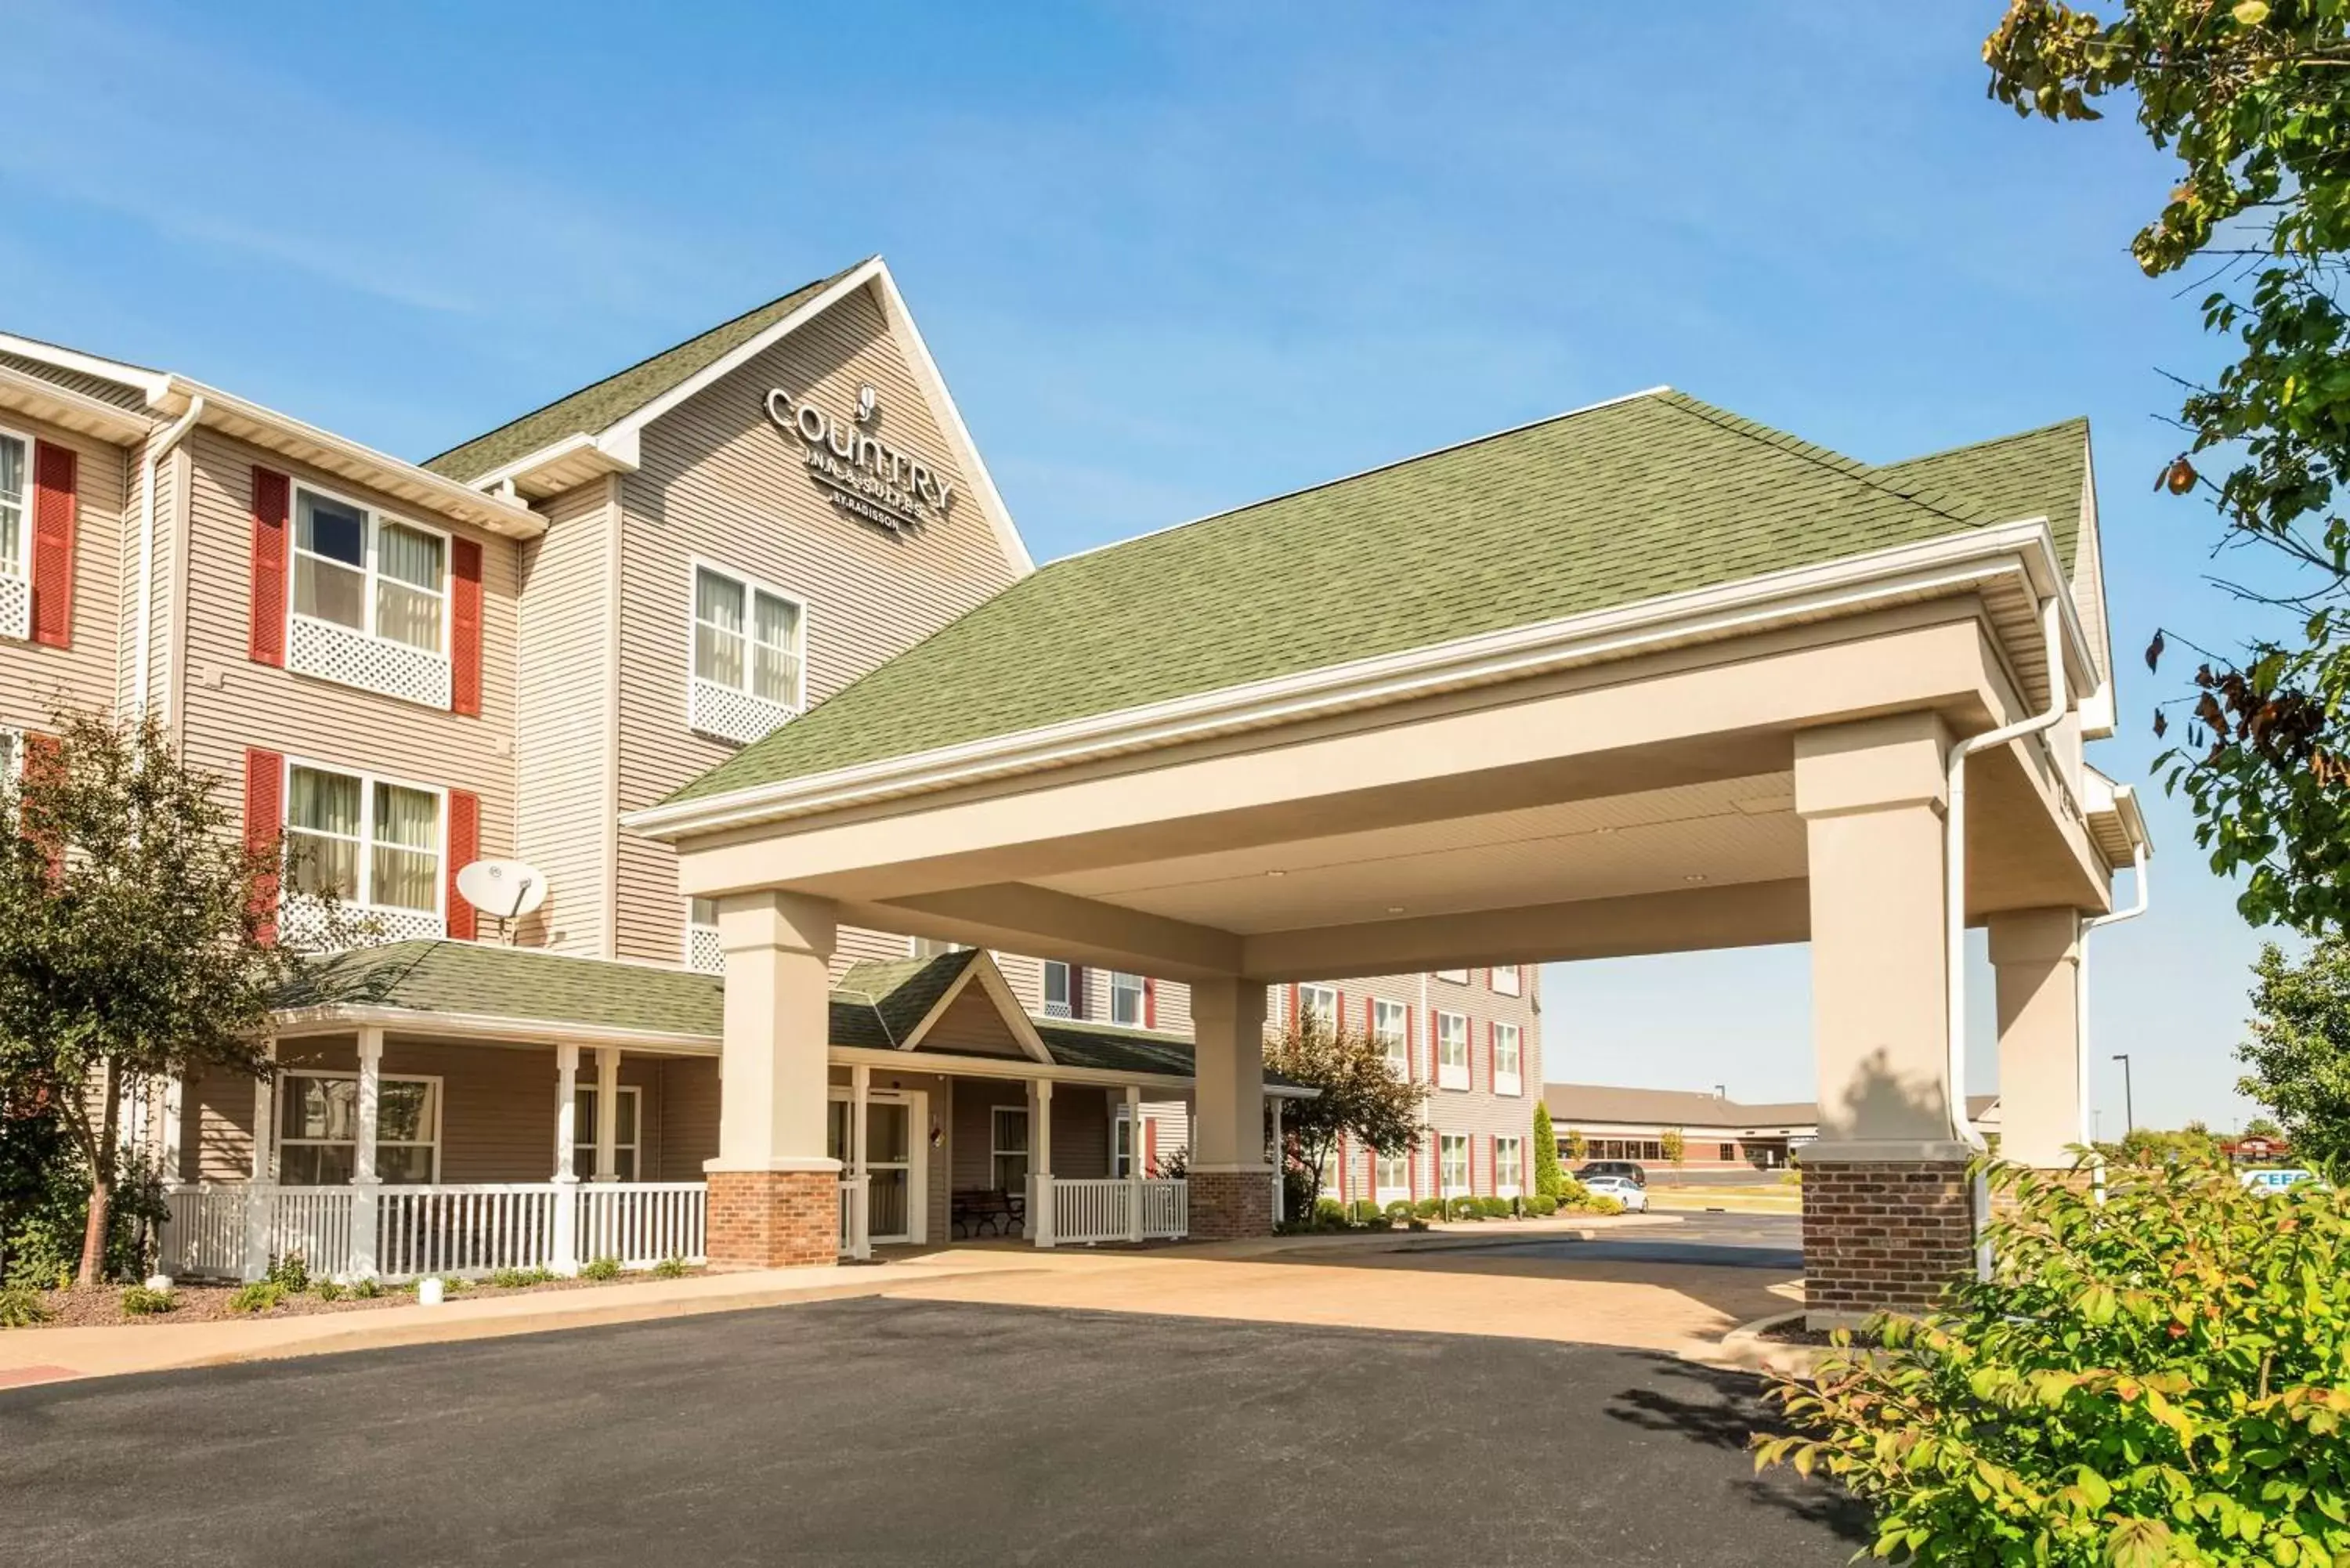 Property building in Country Inn & Suites by Radisson, Peoria North, IL